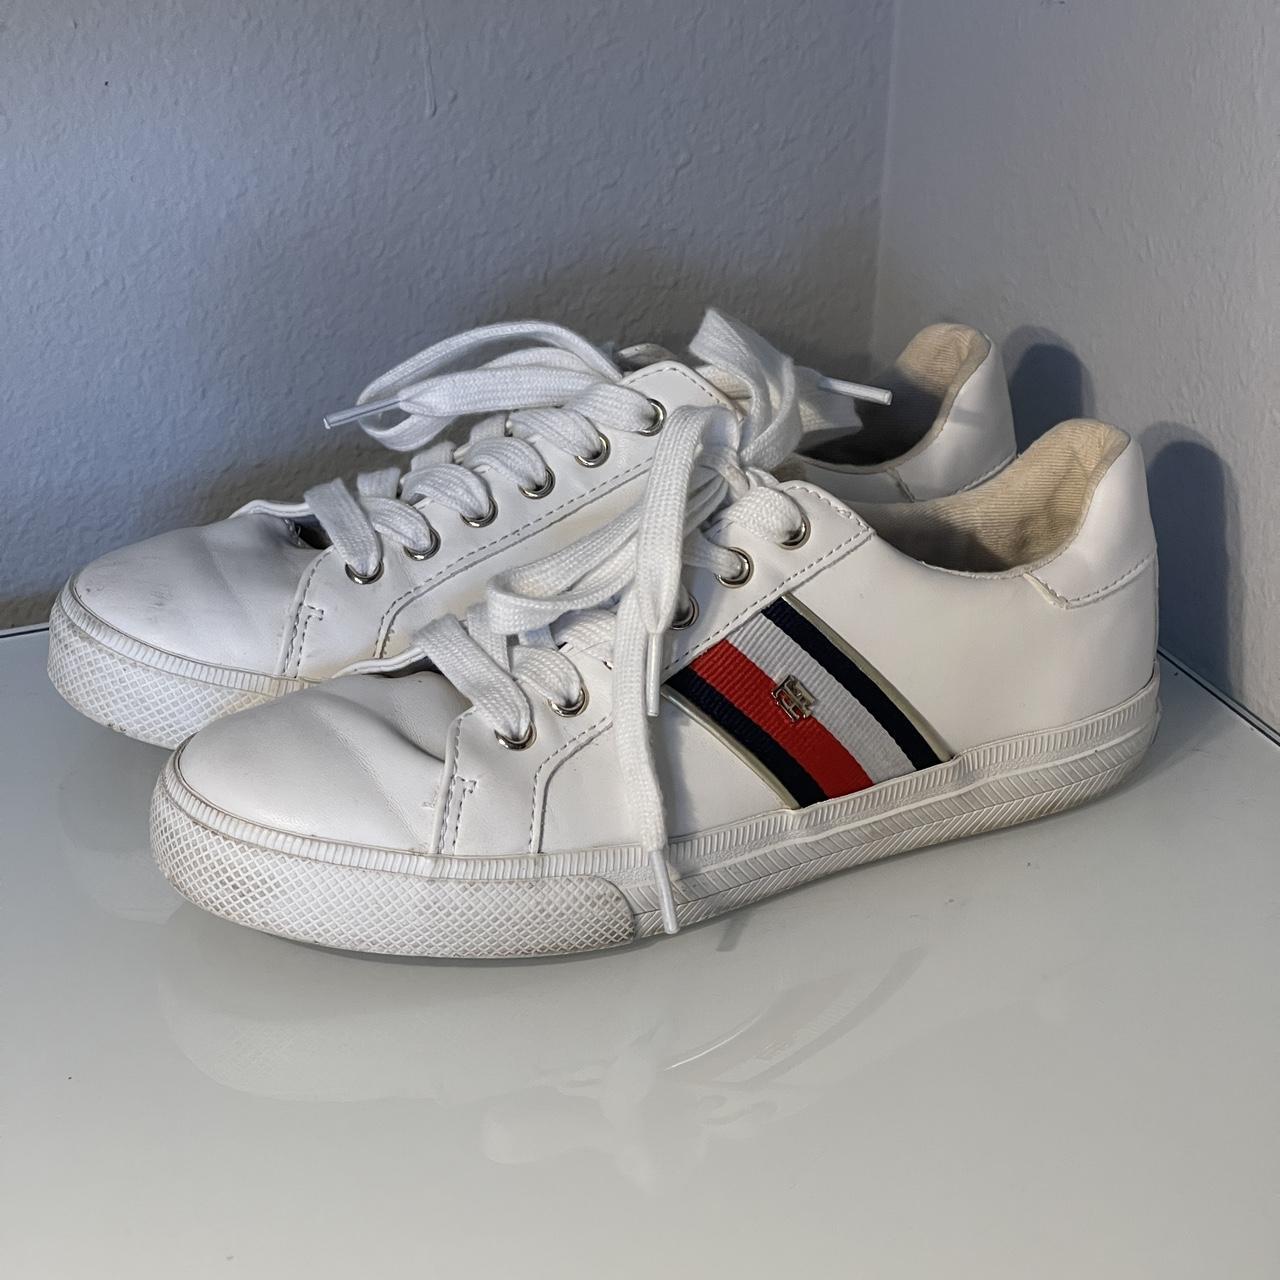 WHITE FAUX-LEATHER TOMMY HILFIGER SHOES - womens... - Depop